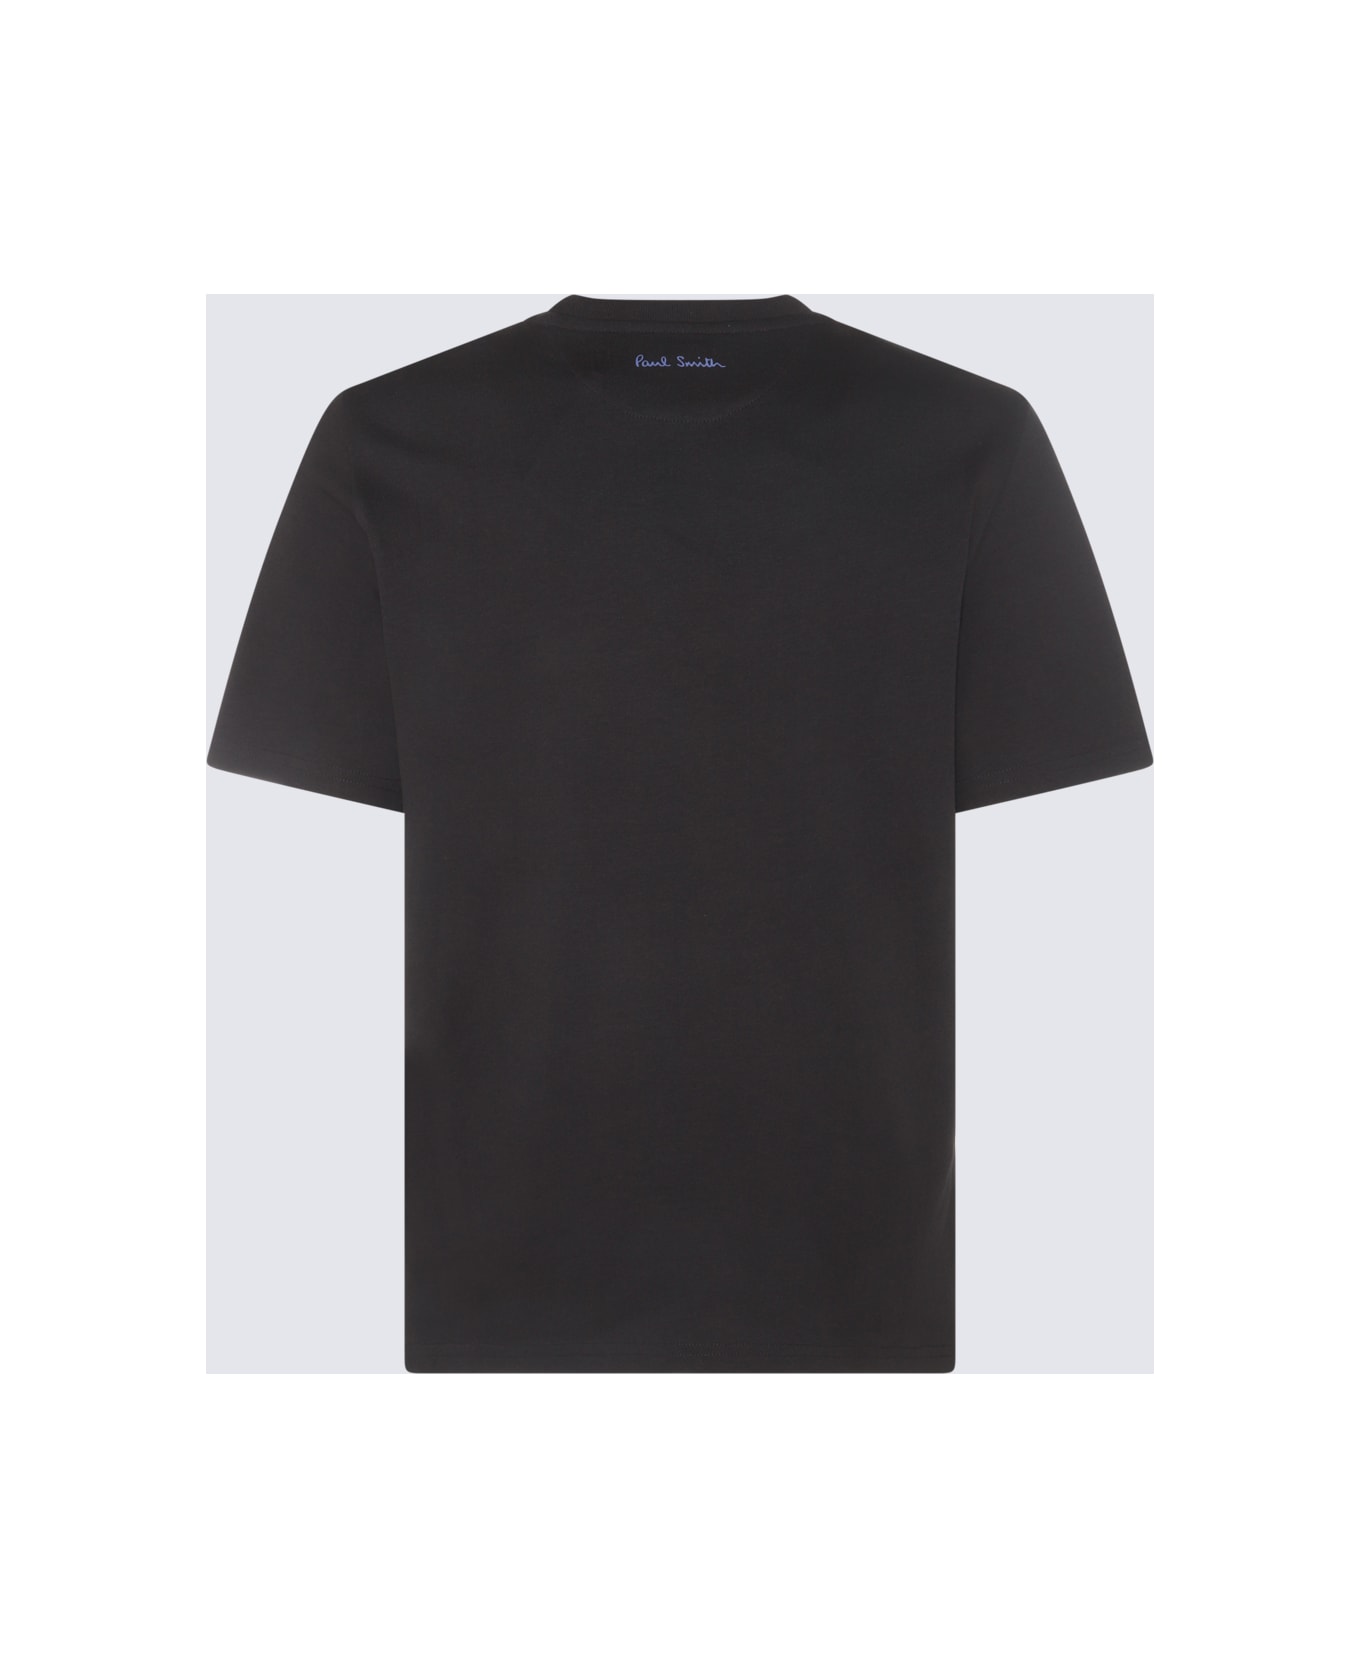 Paul Smith Navy Blue And Violet Cotton T-shirt - Blue